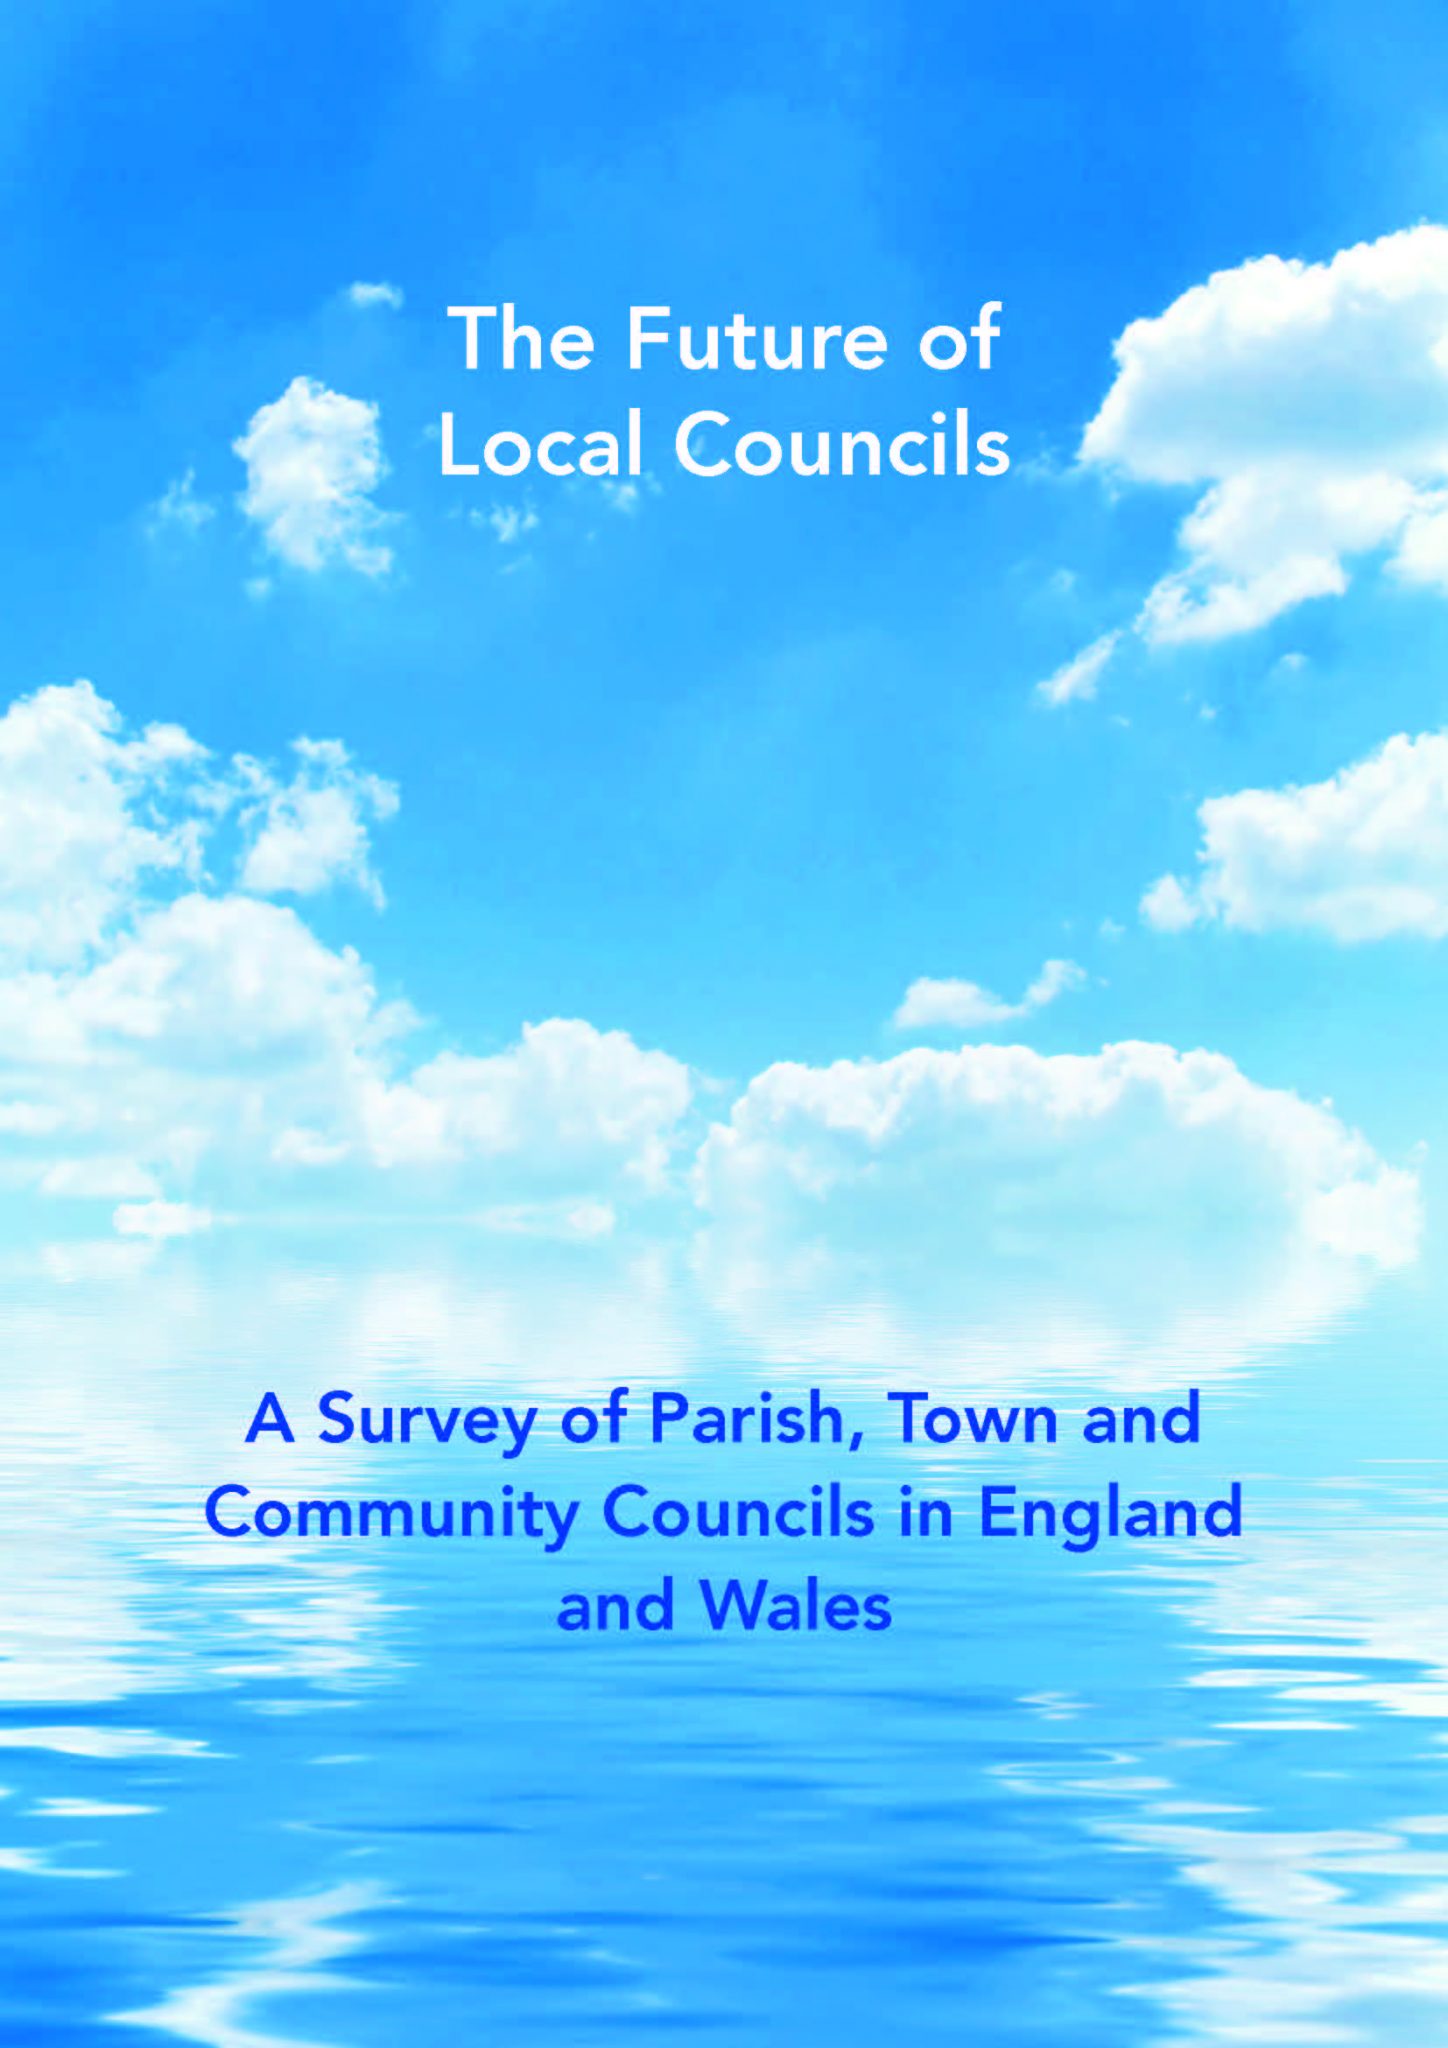 SLCC The Future of Local Councils